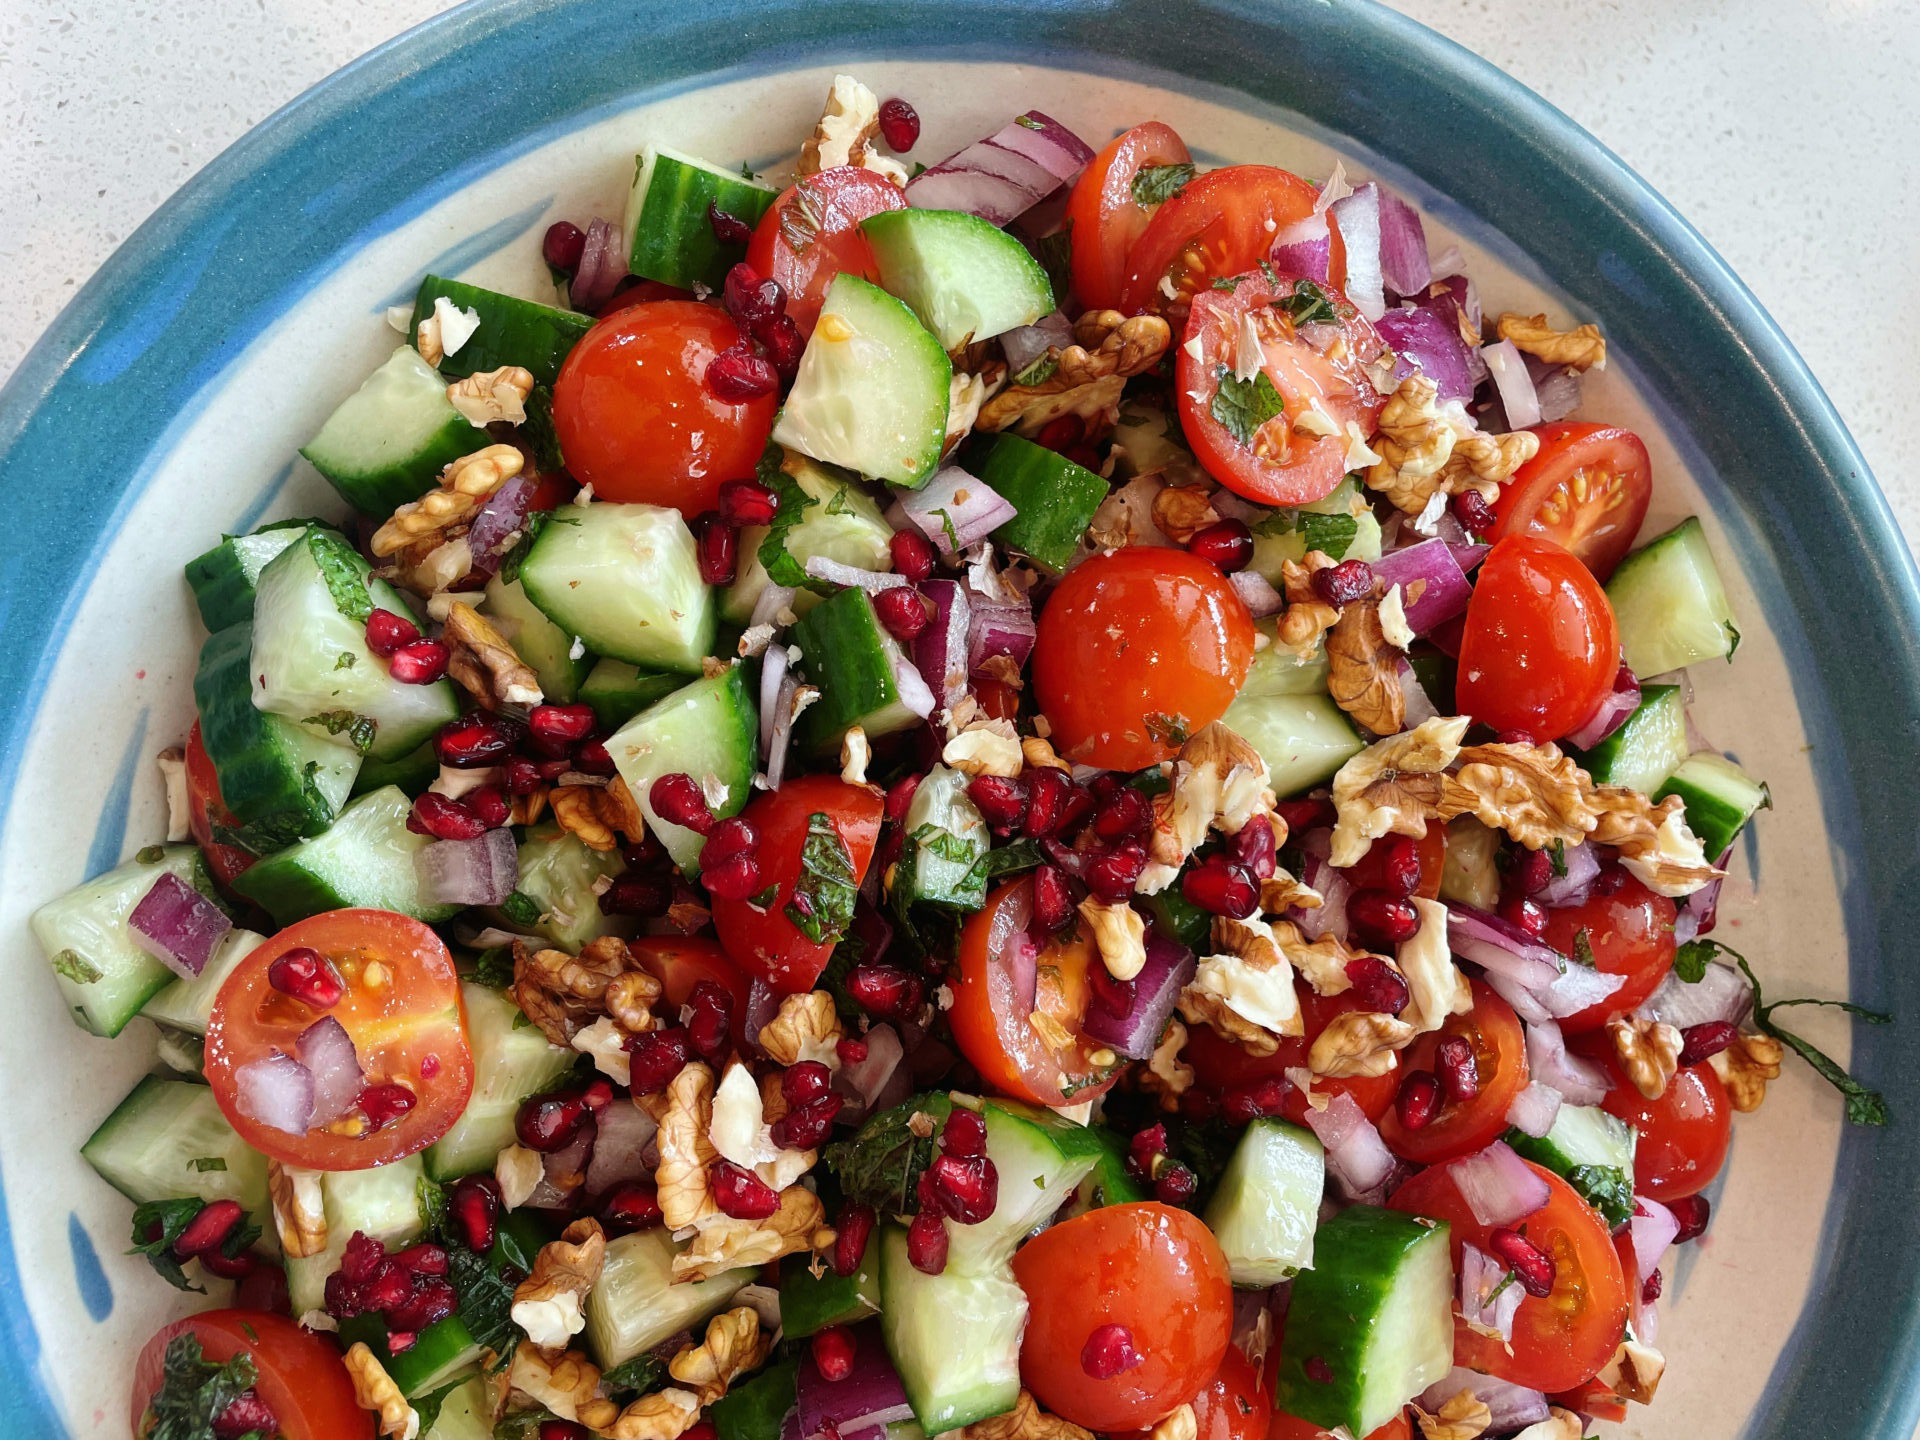 Tomato salad with cucumber, walnuts and pomegranate